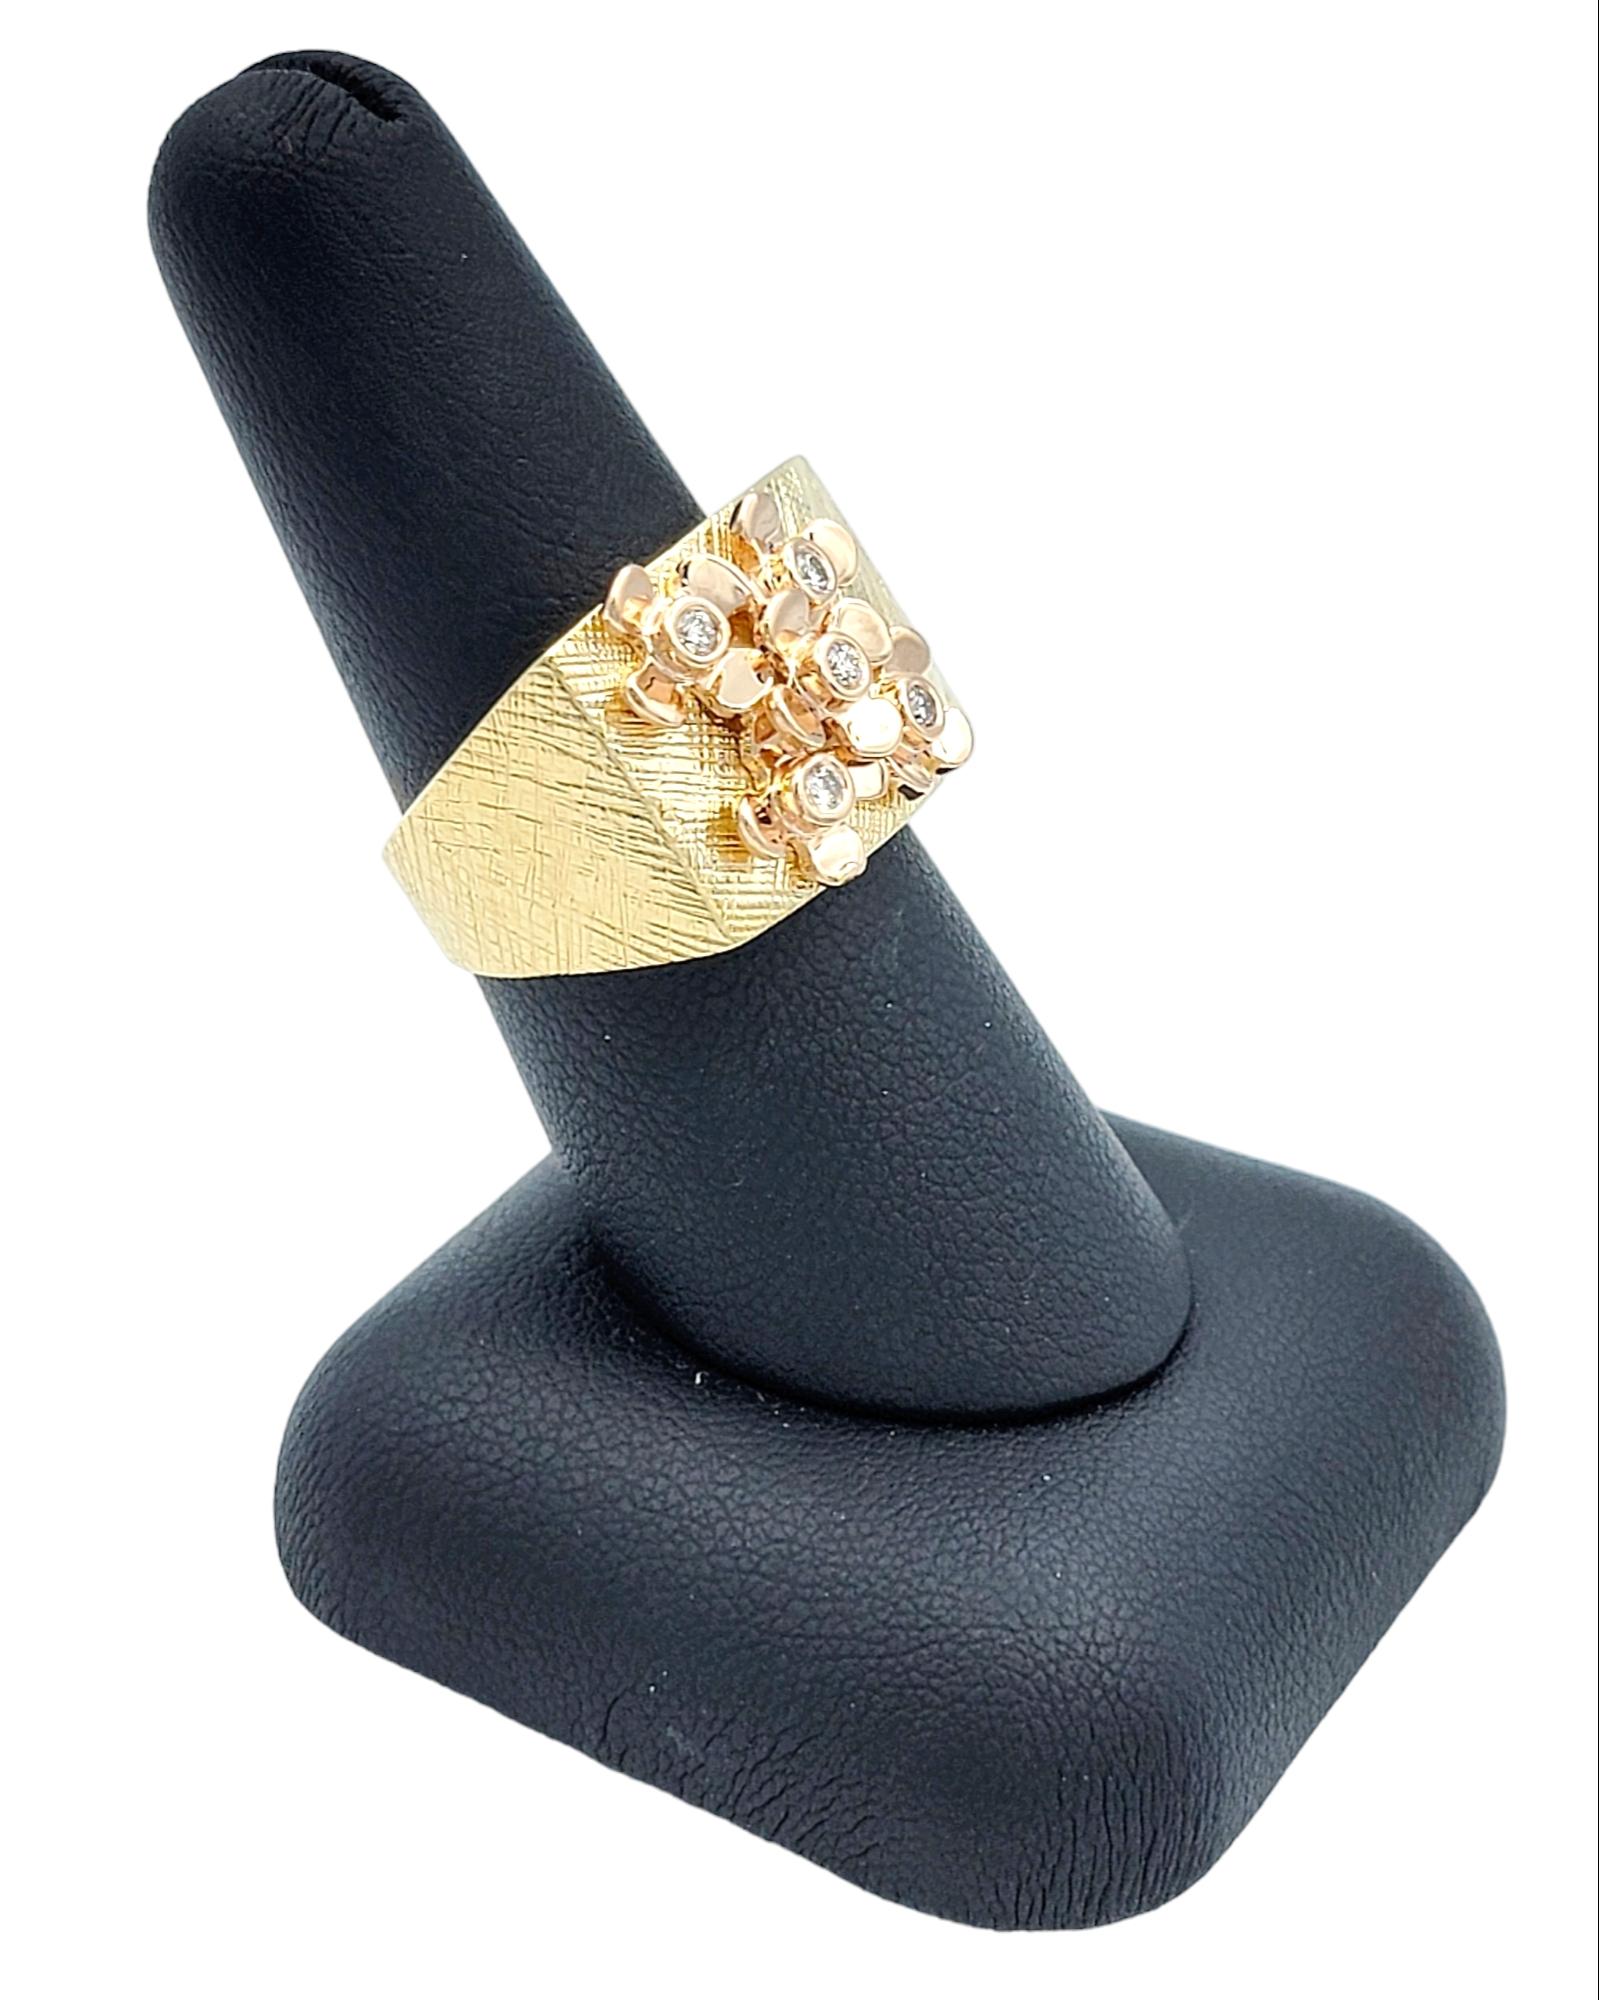 Sonia B. Designs Two-Tone Gold Cocktail Ring with Diamond Accented Flower Motif For Sale 4